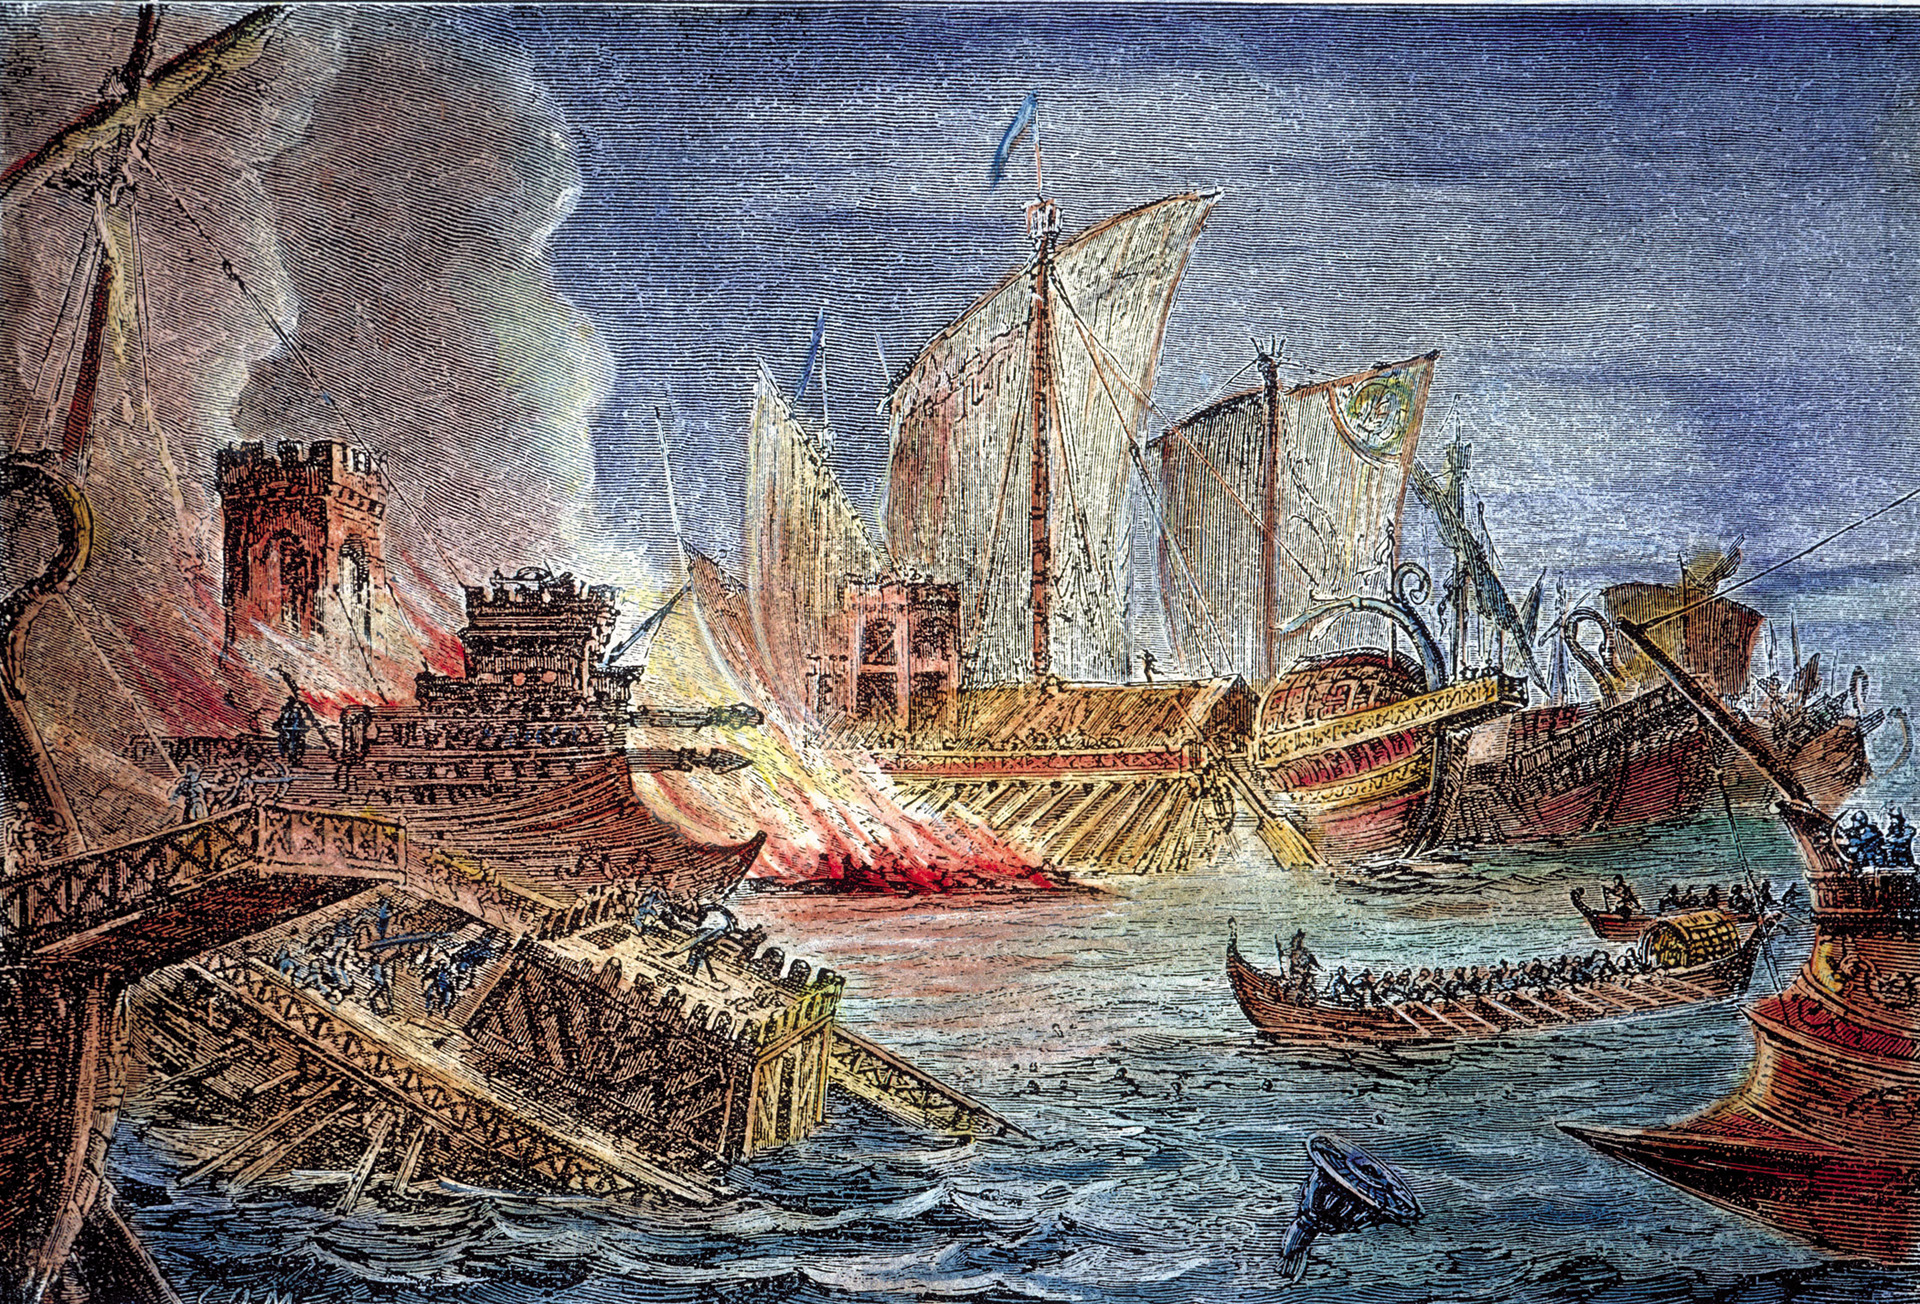 Although Mark Antony and Cleopatra were able to escape at Actium, many of their men were not so lucky. Octavian’s men brutalized Antony’s remaining forces and set fire to their ships. Nearly a year later, both Mark Antony and Cleopatra would commit suicide as Octavian took the eastern capital of Alexandria.